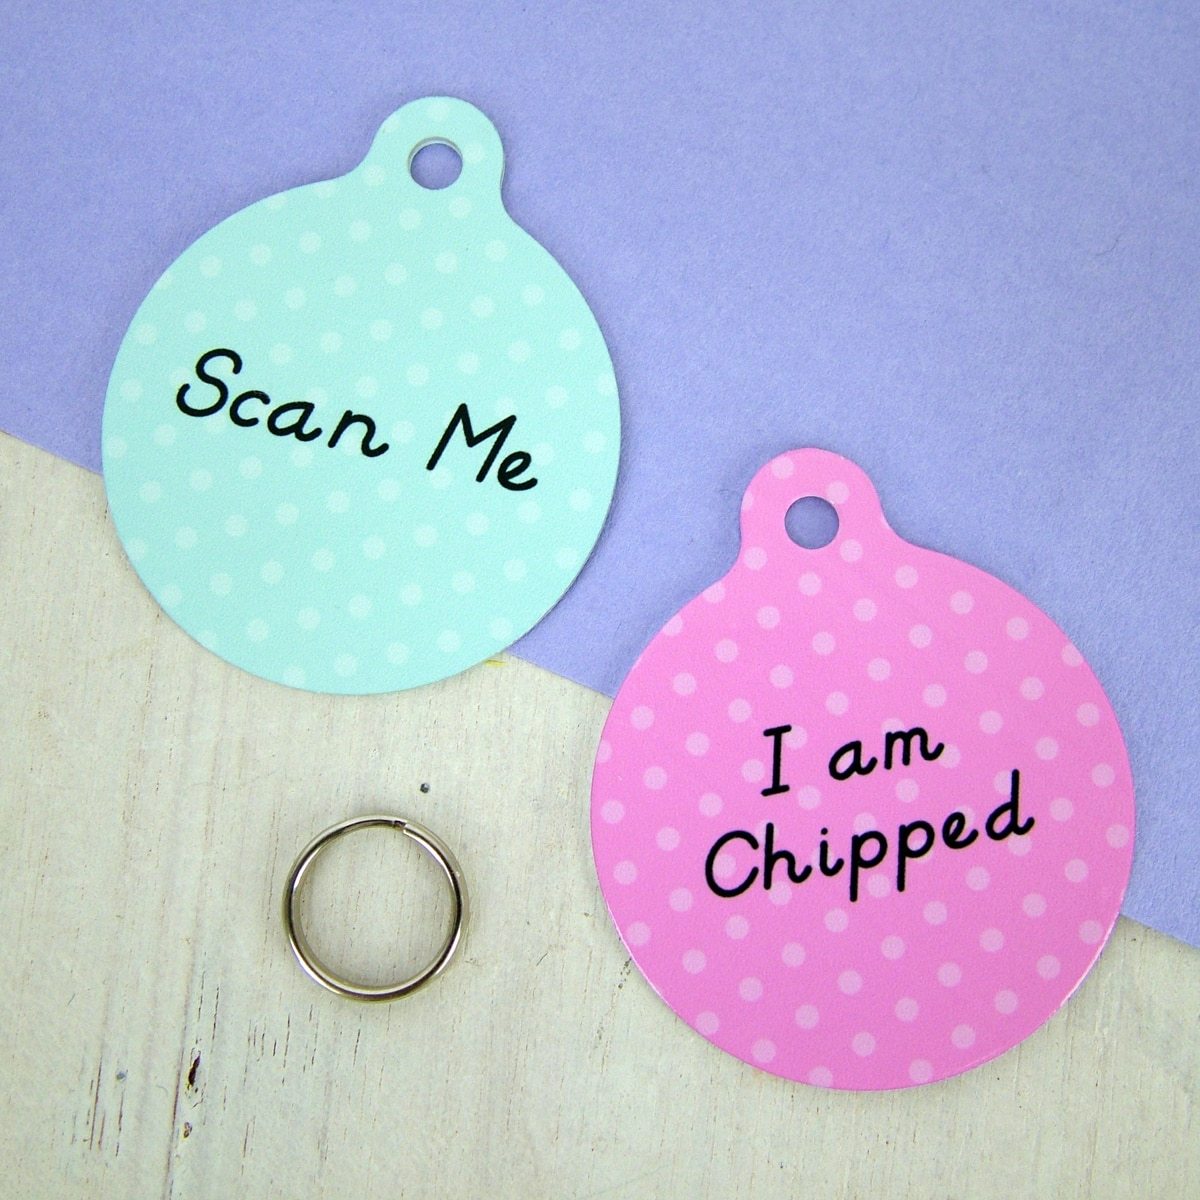 Chipped/Scan Me Pet Tag  - Hoobynoo - Personalised Pet Tags and Gifts